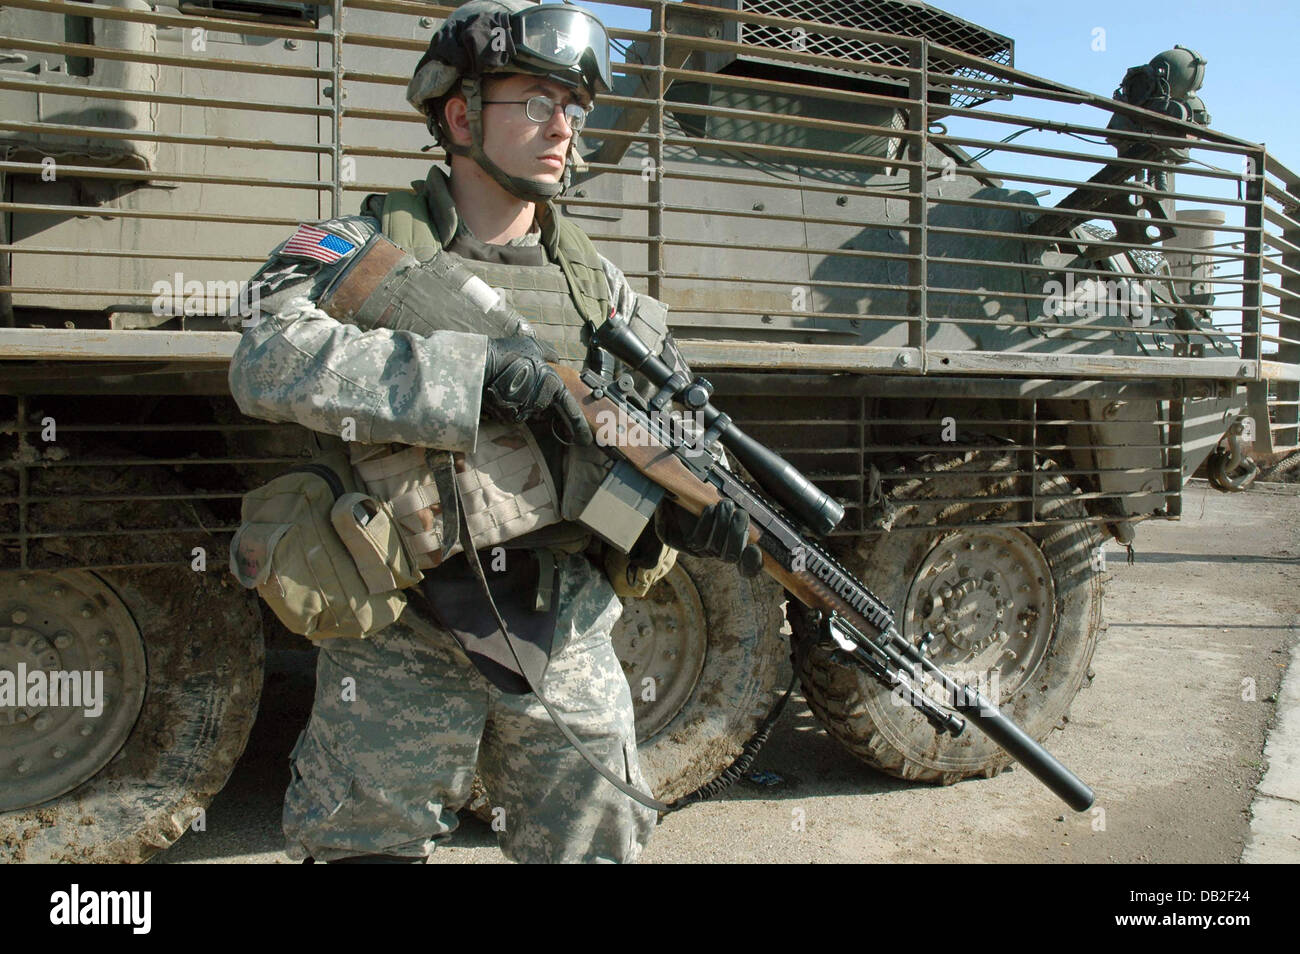 A soldier stands guard with his M14 sniper rifle during a patrol in Bagdad, Iraq, March 2007. The soldier belongs to the 3rd Stryker Brigade Combat Team of the 2nd Infantry Division, forming part of the 1st Battalion, 23rd Infantry Regiment. He wears an Advanced Combat Uniform, Interceptor Body Armour und an Advanced Combat Helmet. Photo: Carl Schulze Stock Photo